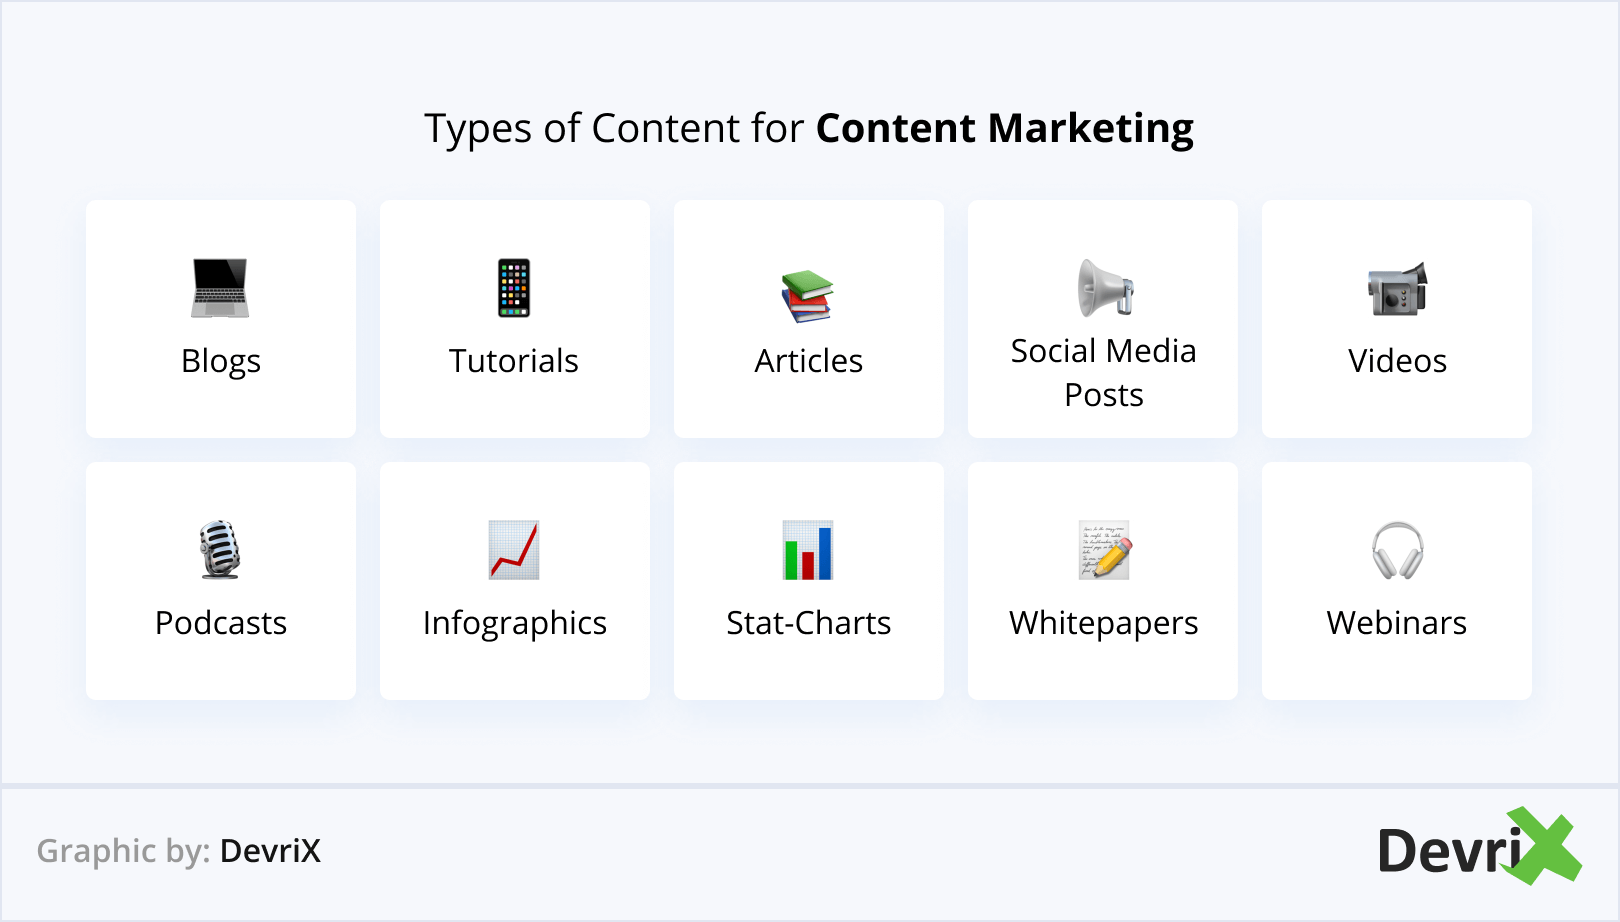 Types of Content for Content Marketing